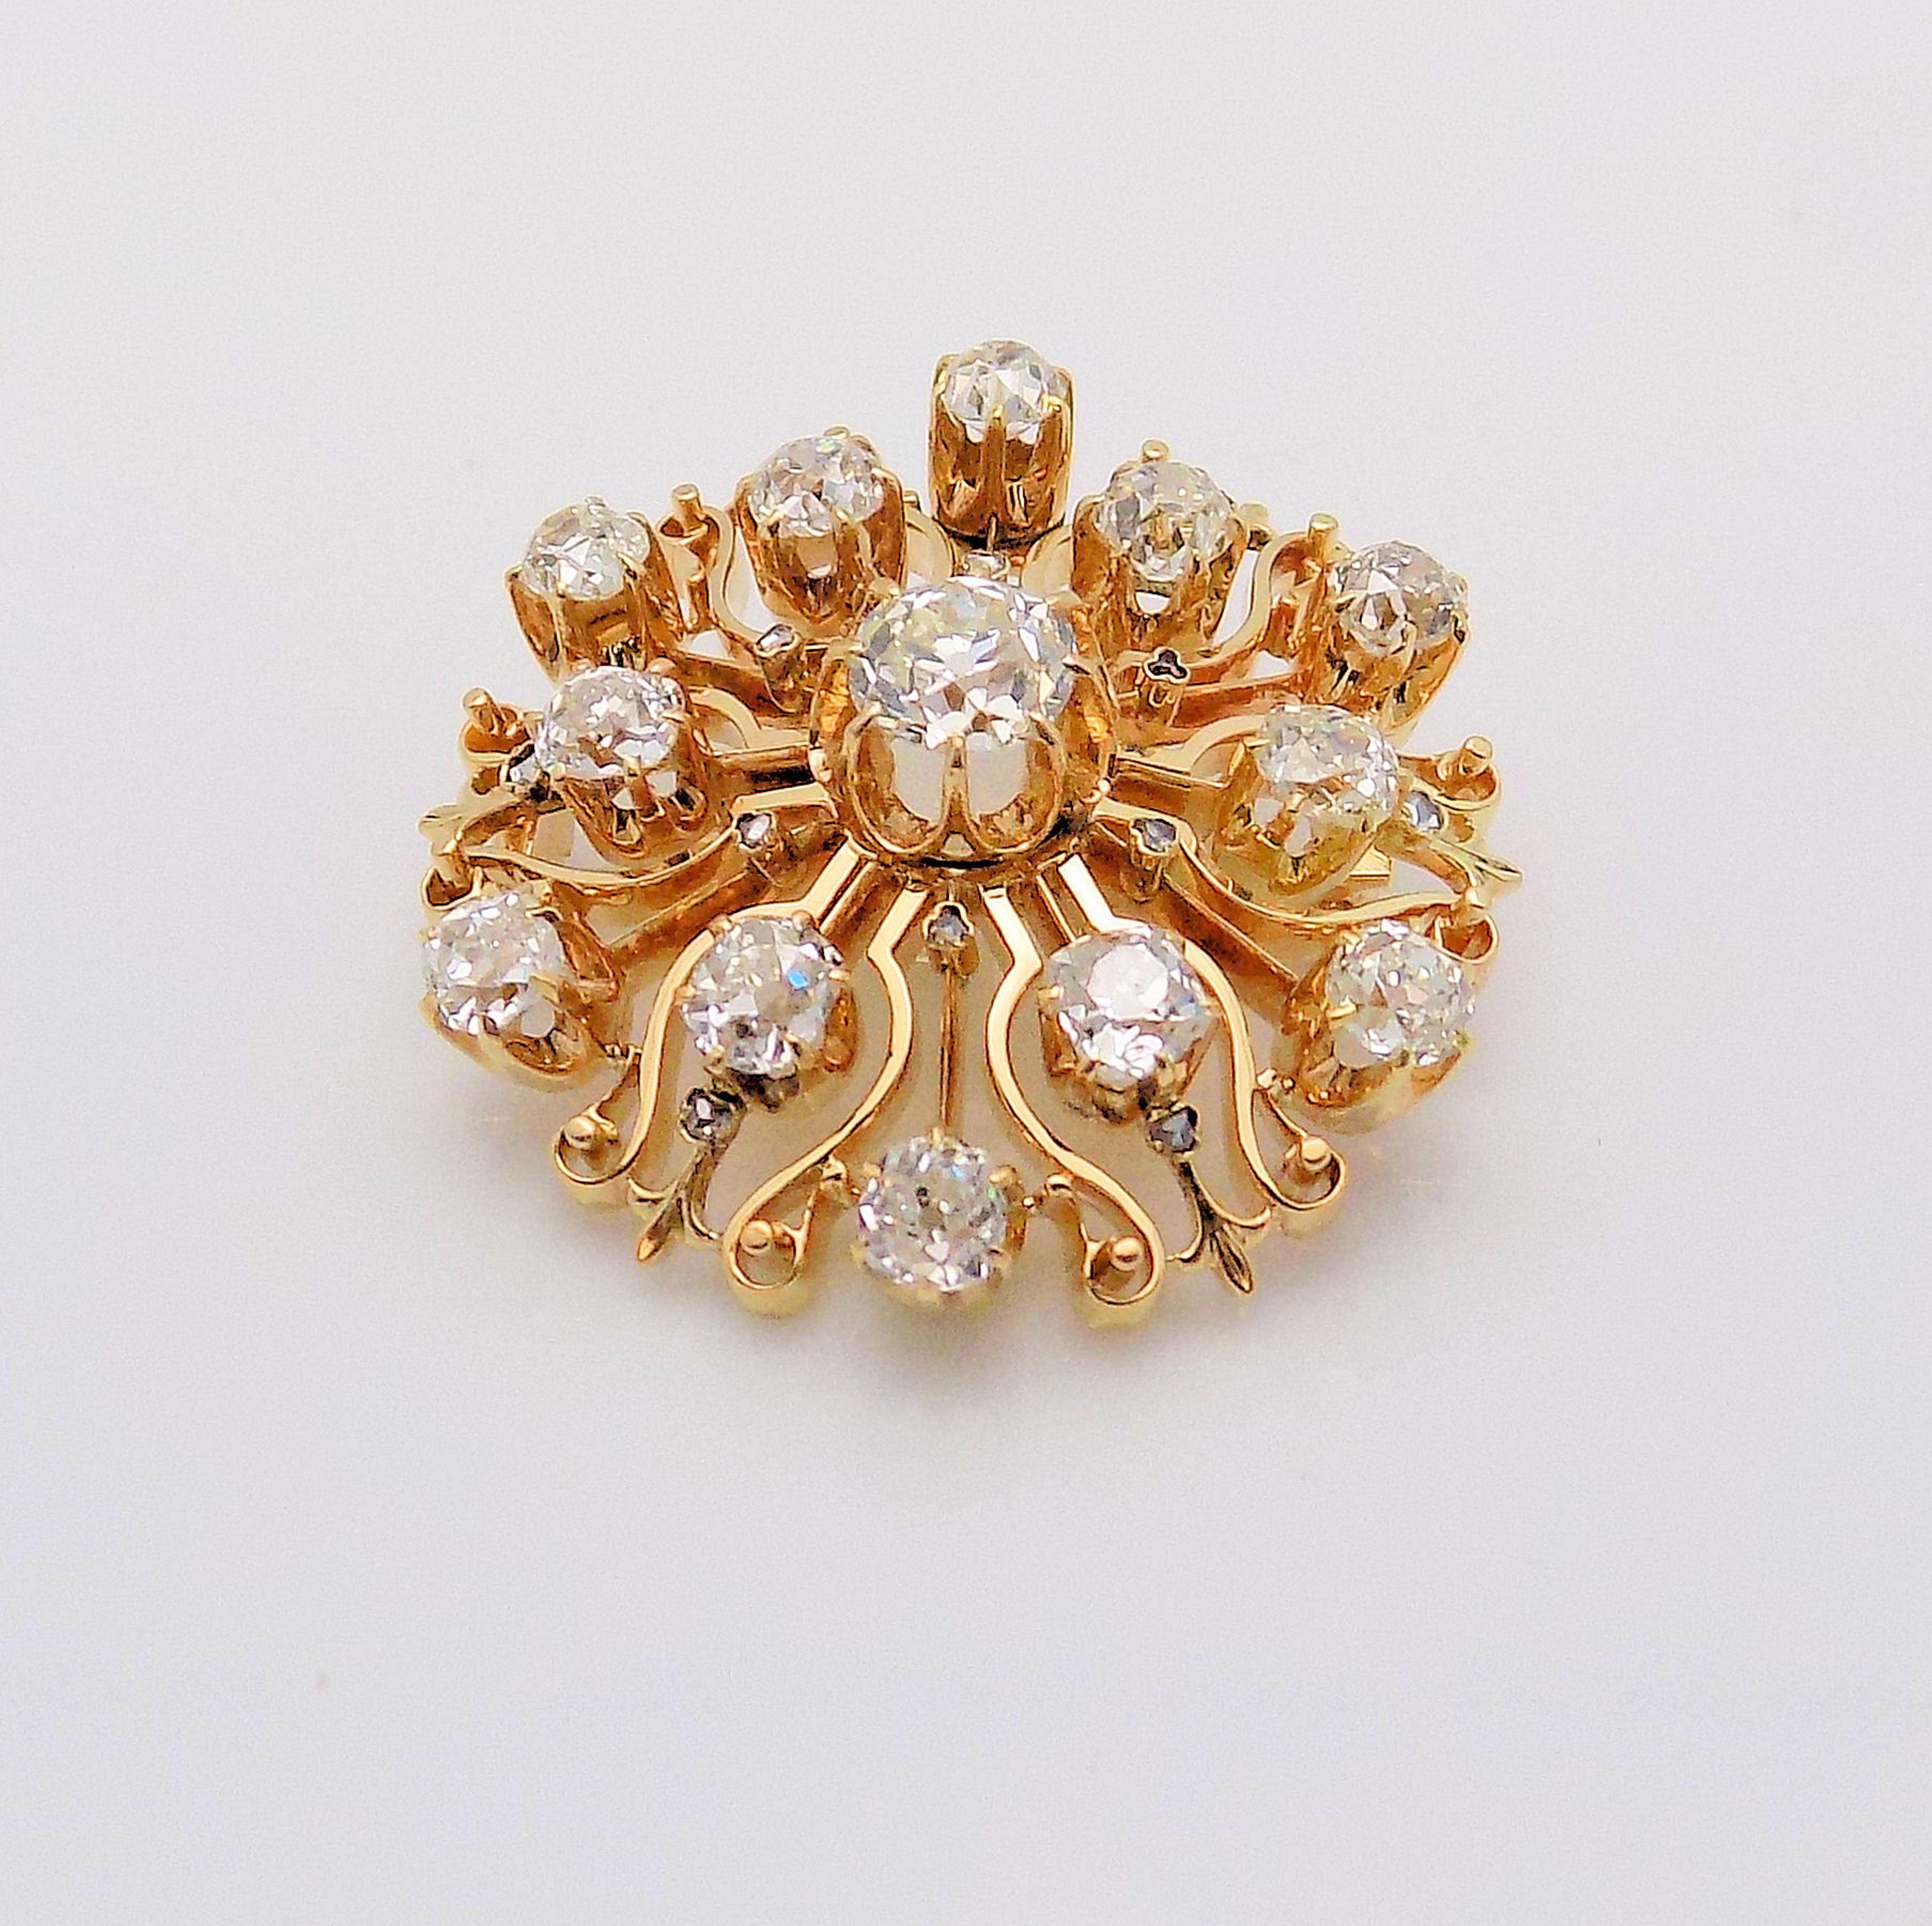 Old Mine Cut Diamond Antique Brooch For Sale